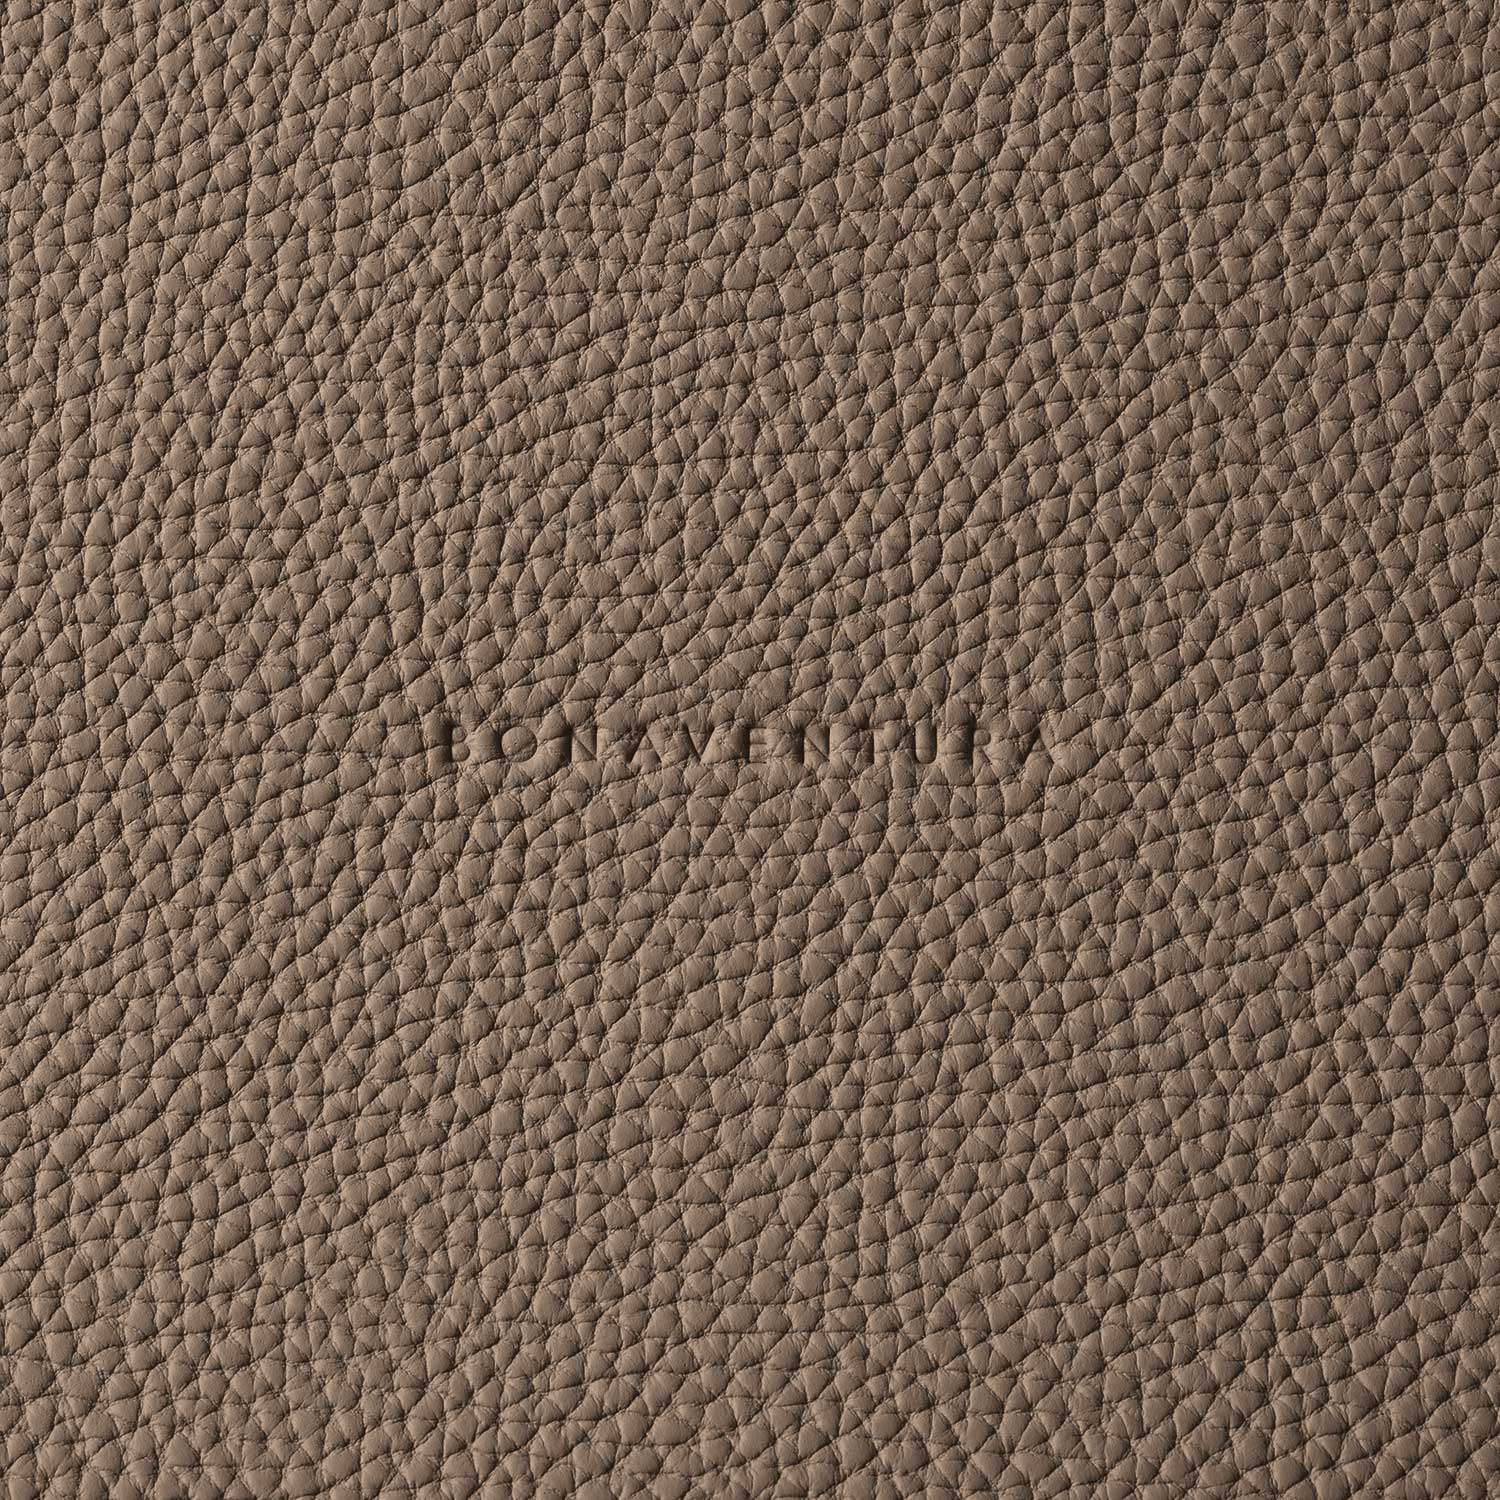 Placemat (square) in shrink leather